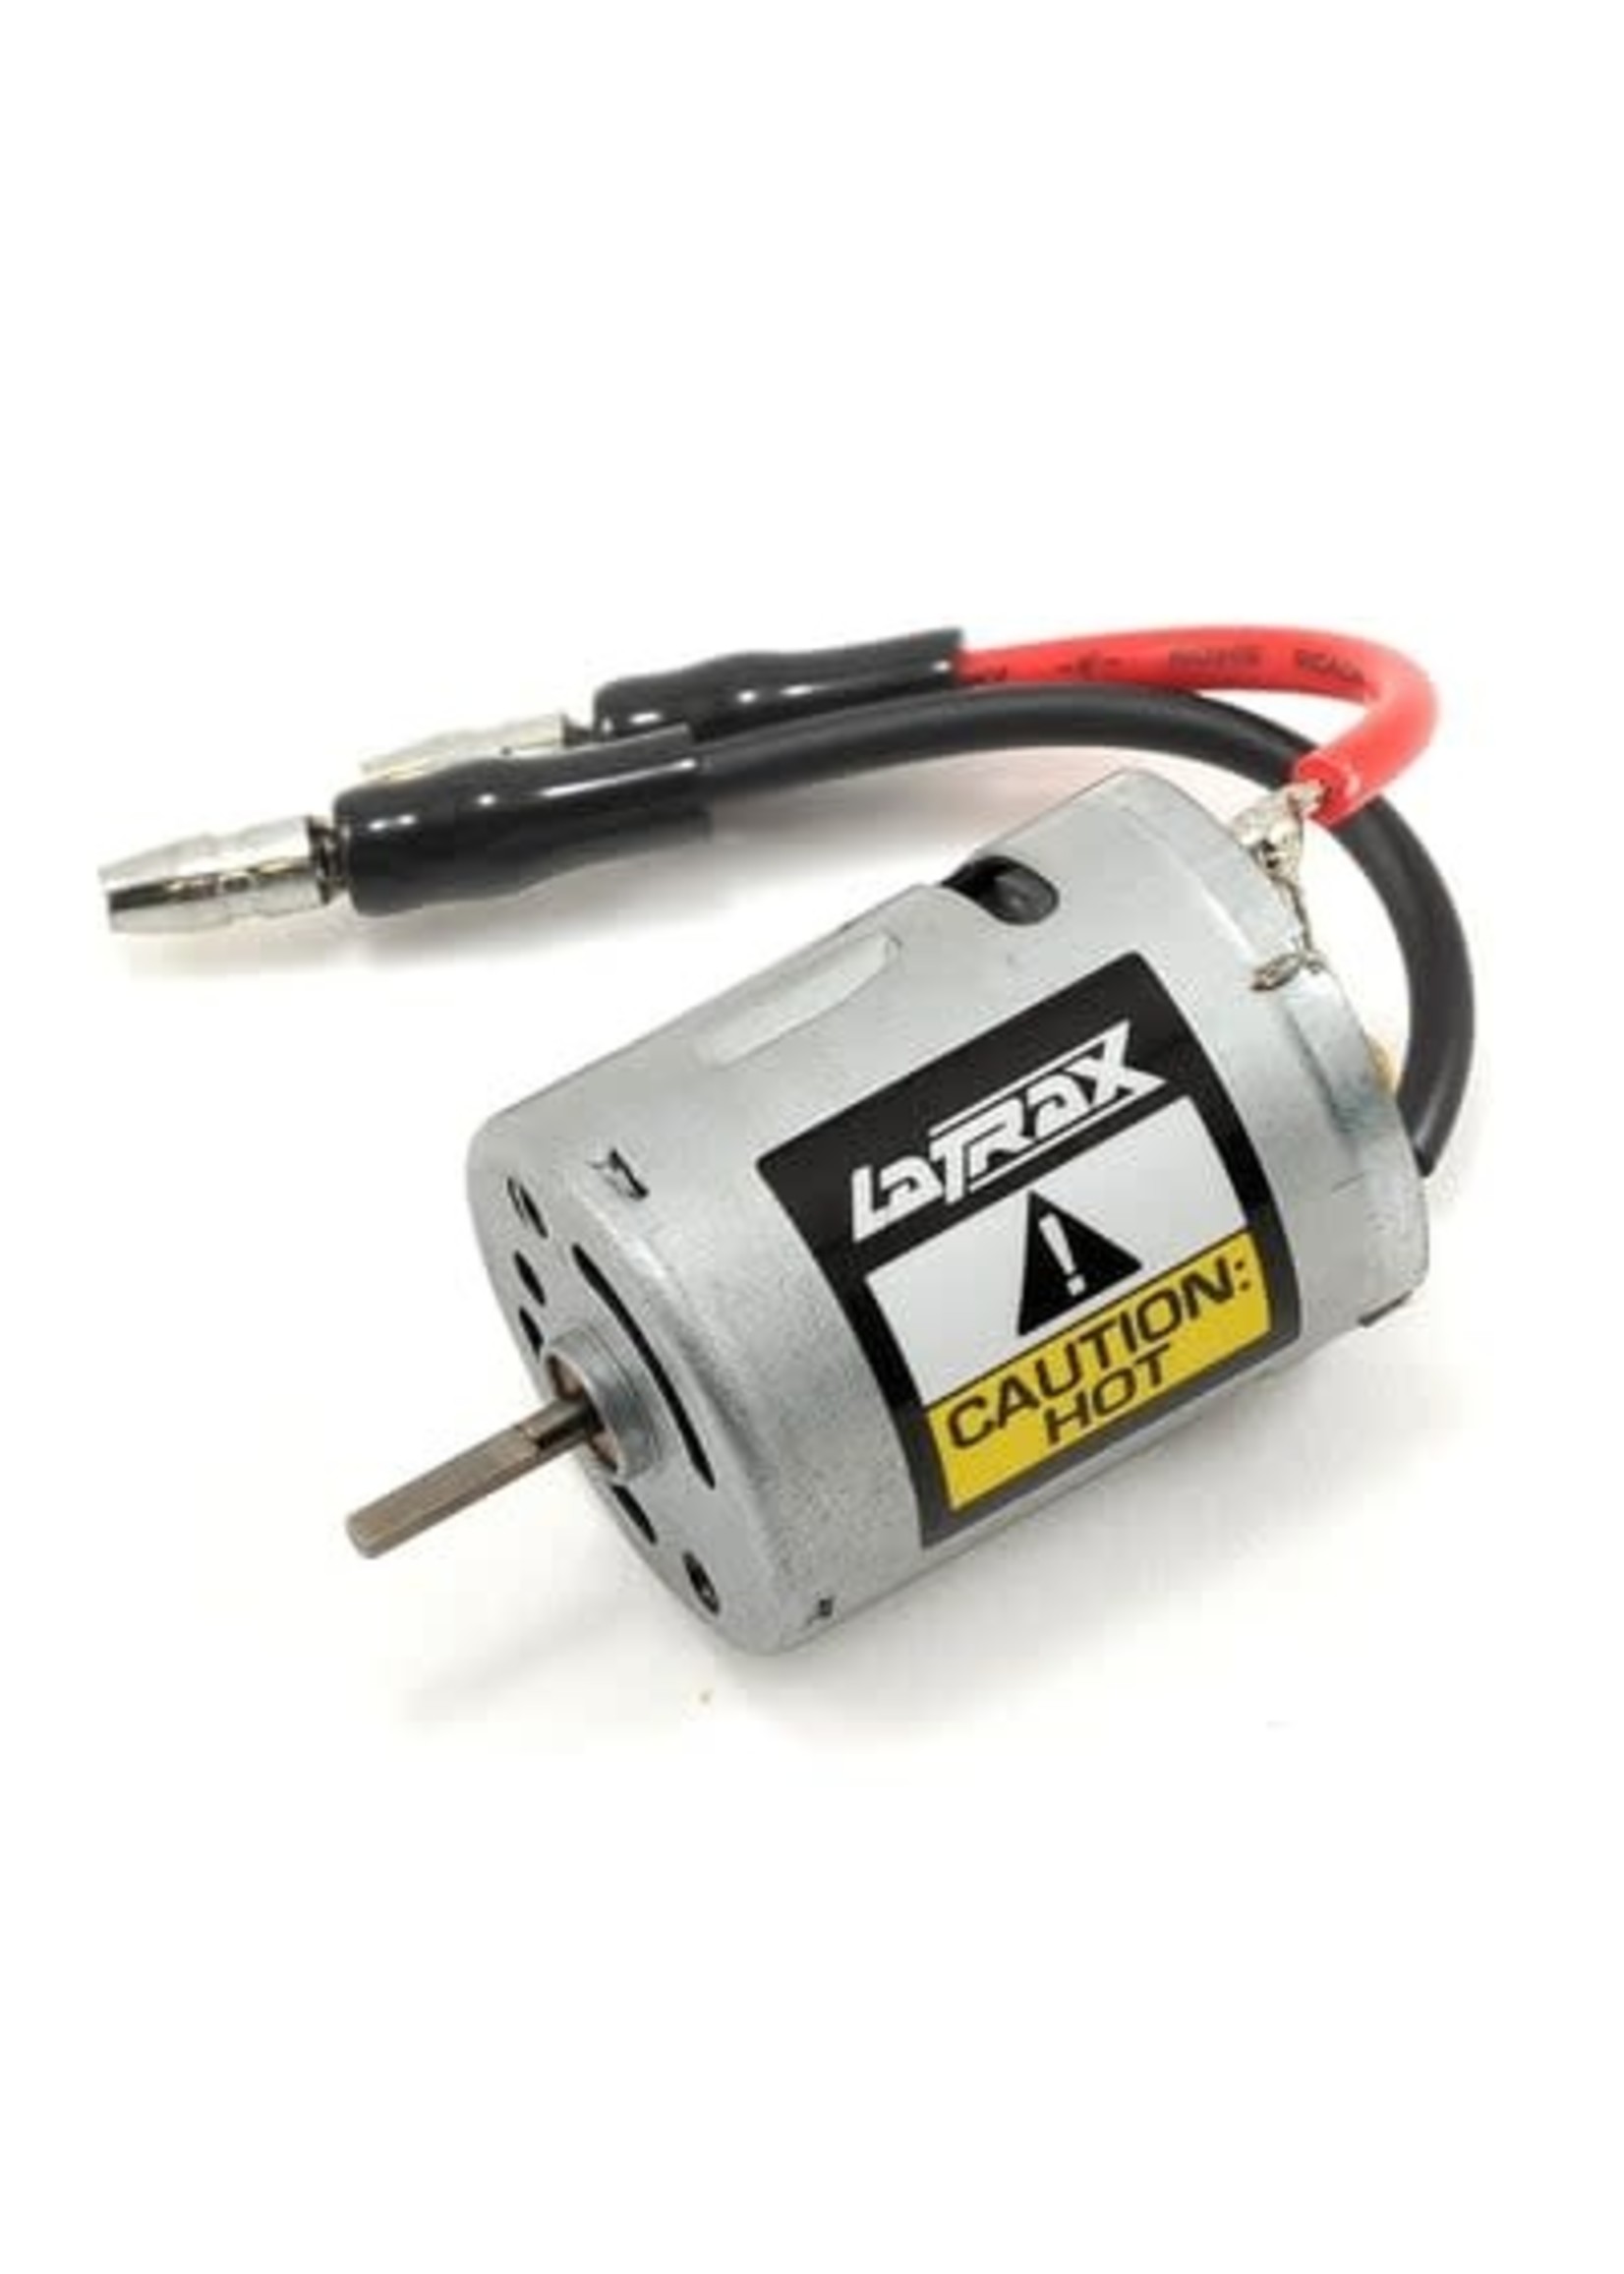 Traxxas 7575X Motor, 370 (28-turn) (assembled with bullet connectors)